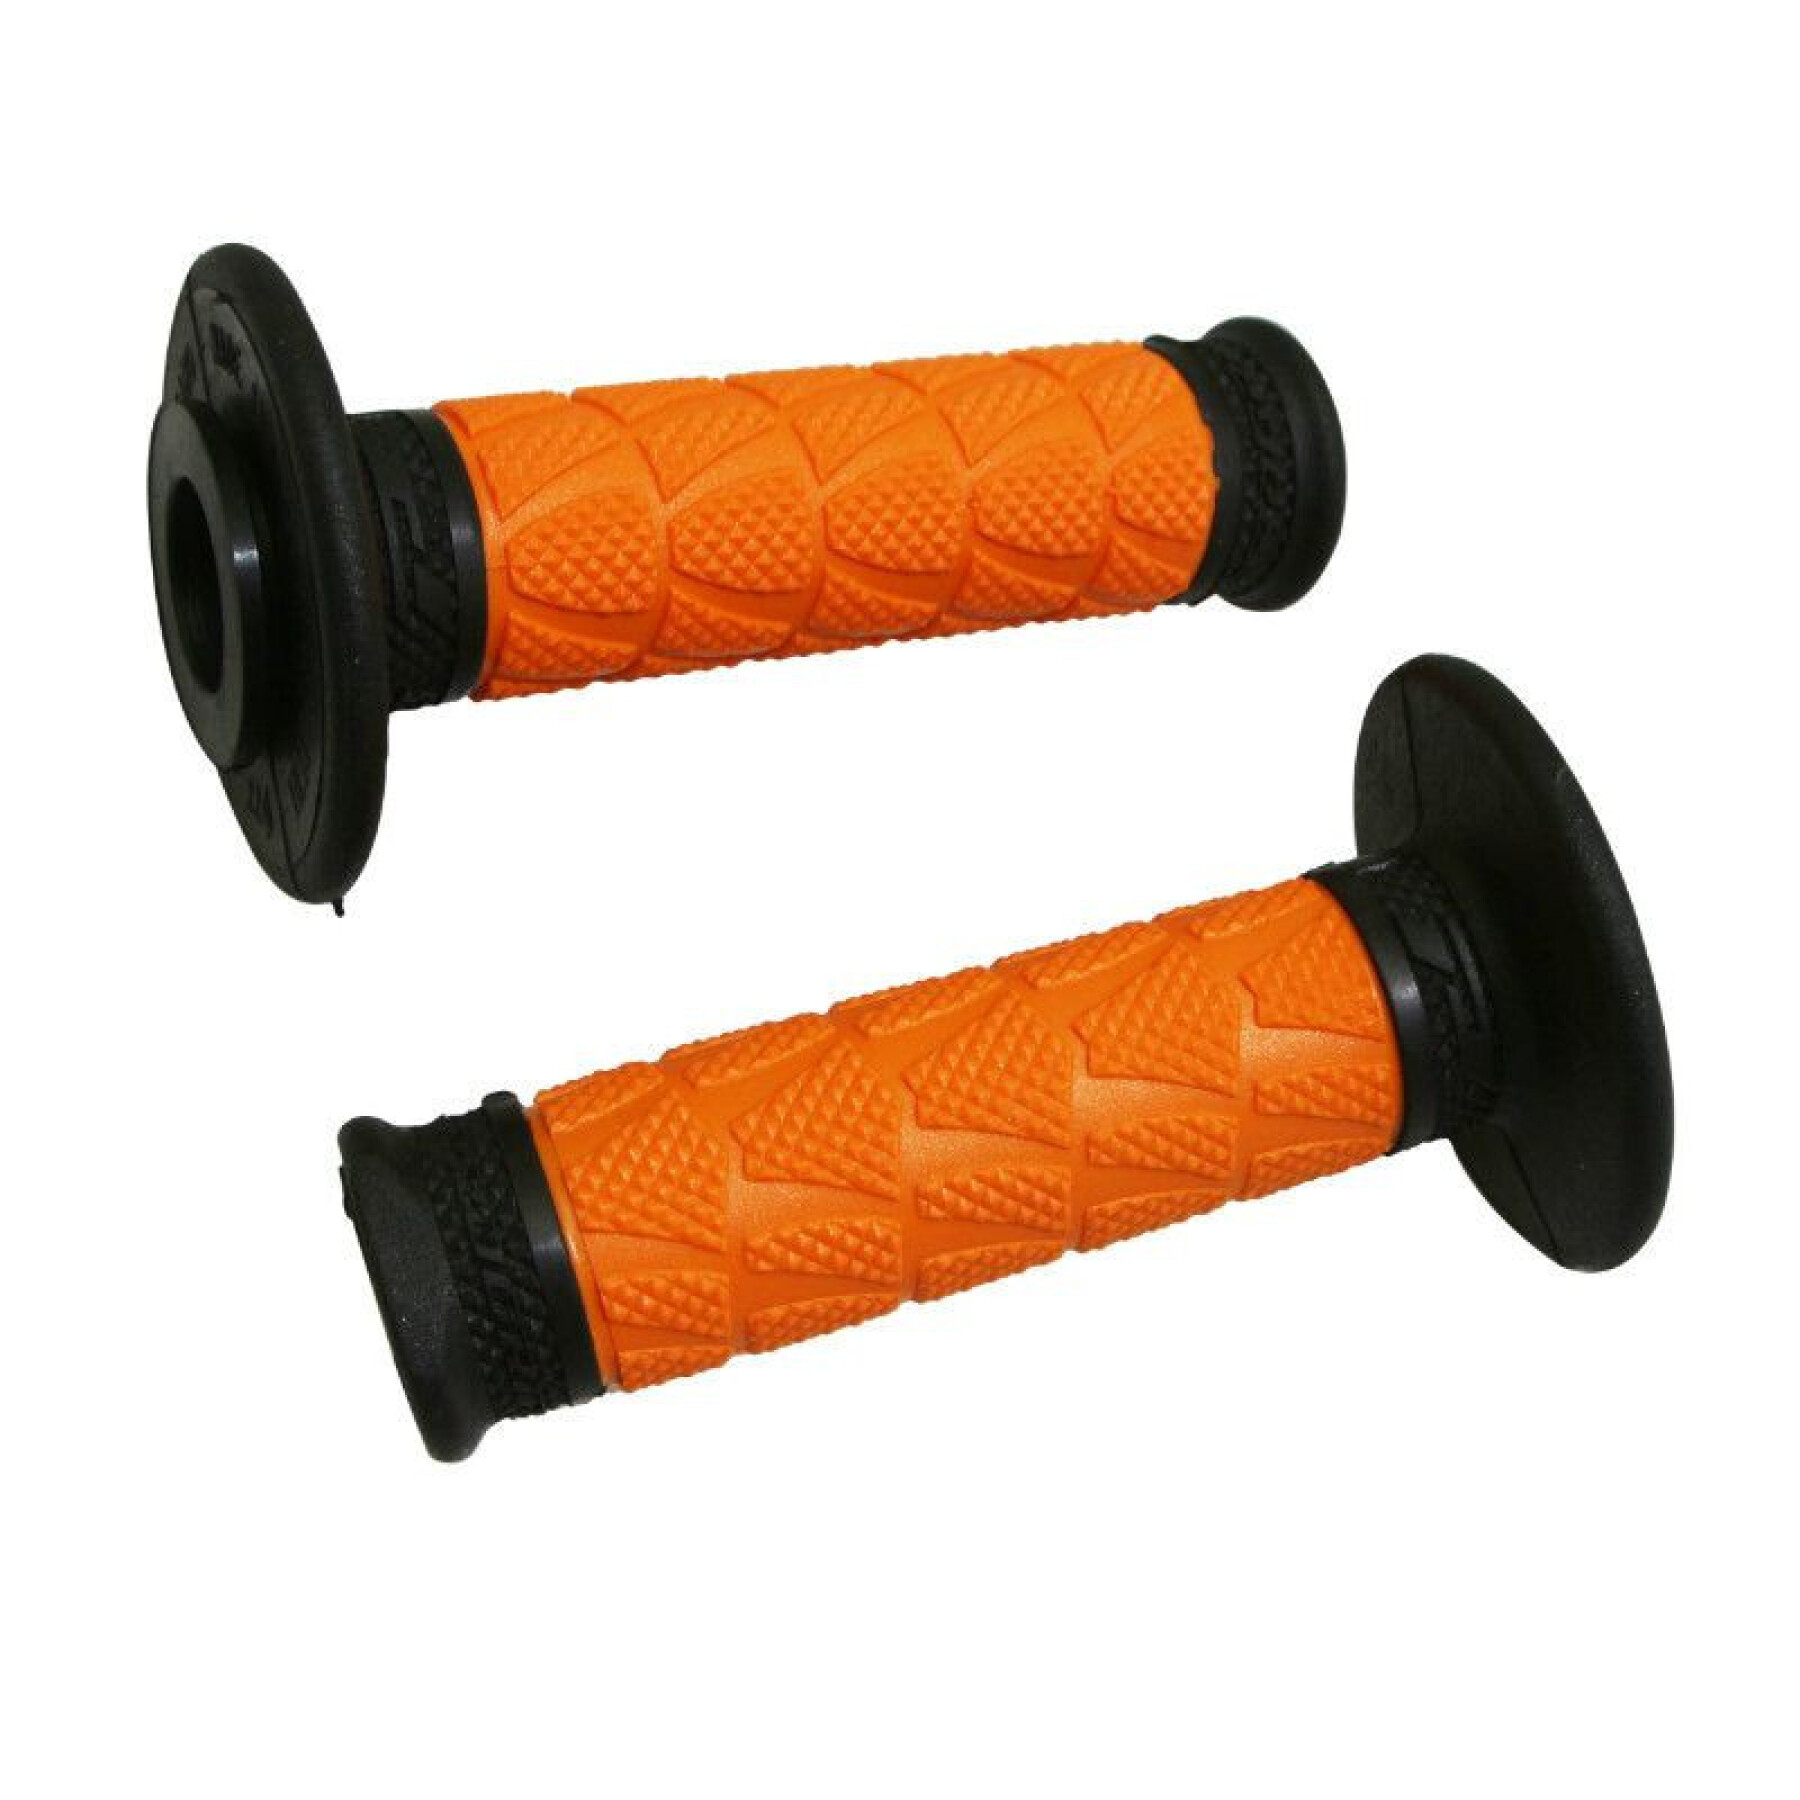 Pair of handle covers Progrip 783 Double Densite